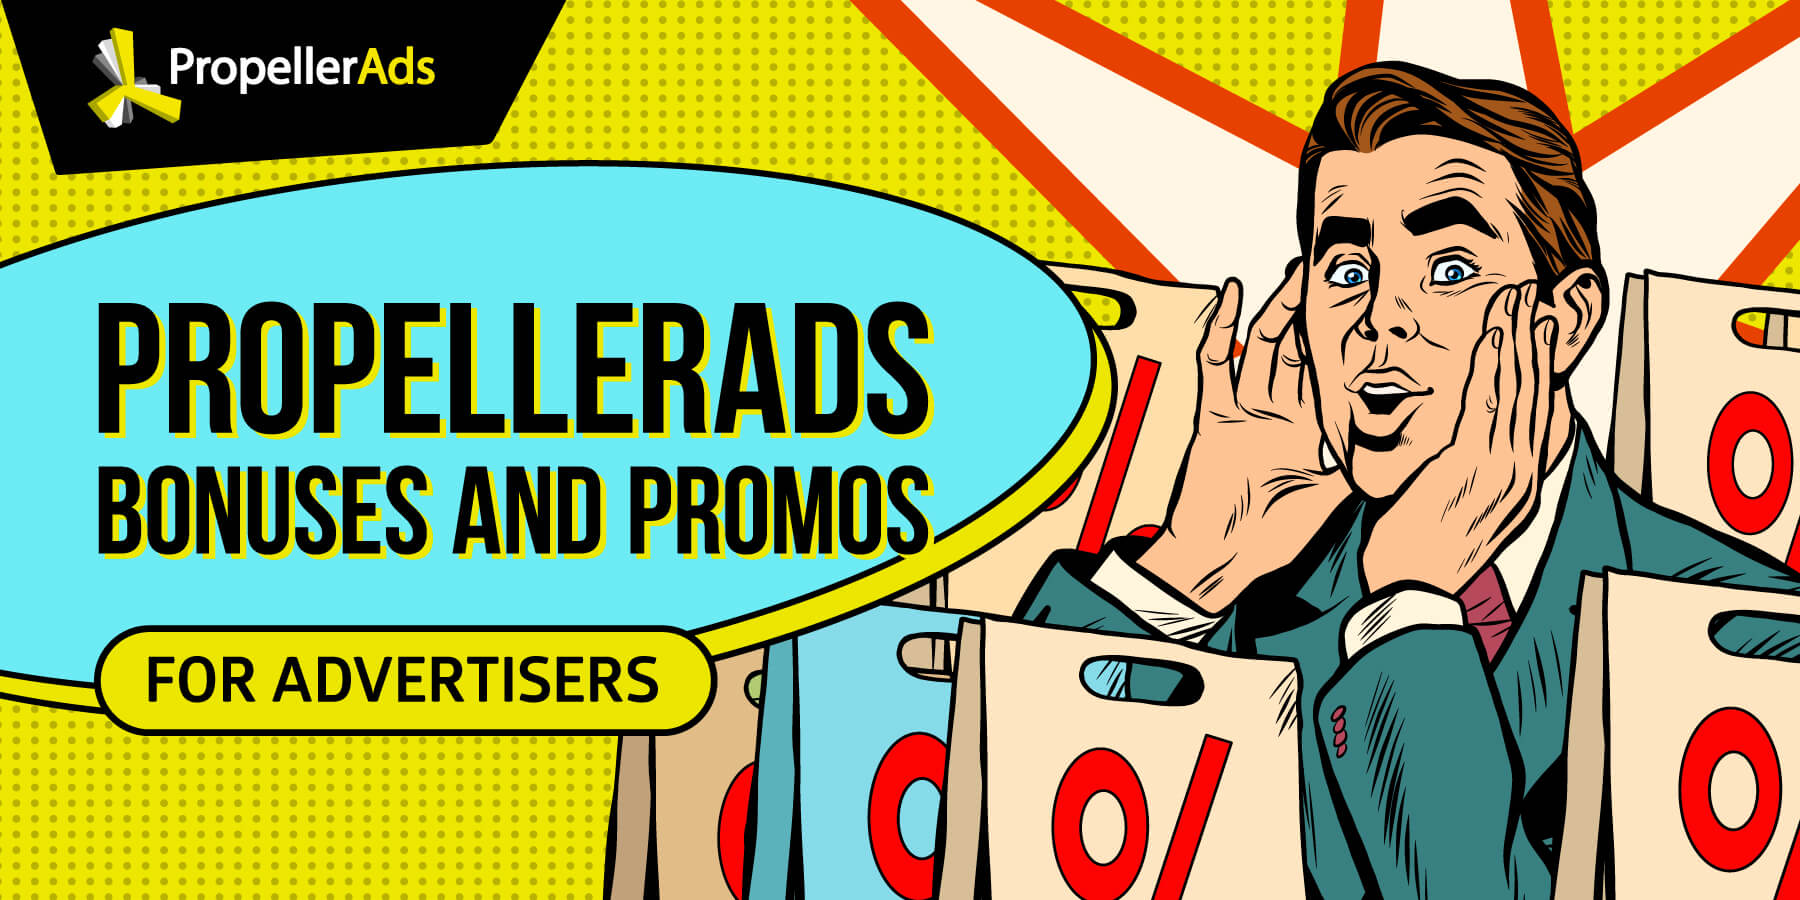 Propeller ads bonuses and promos